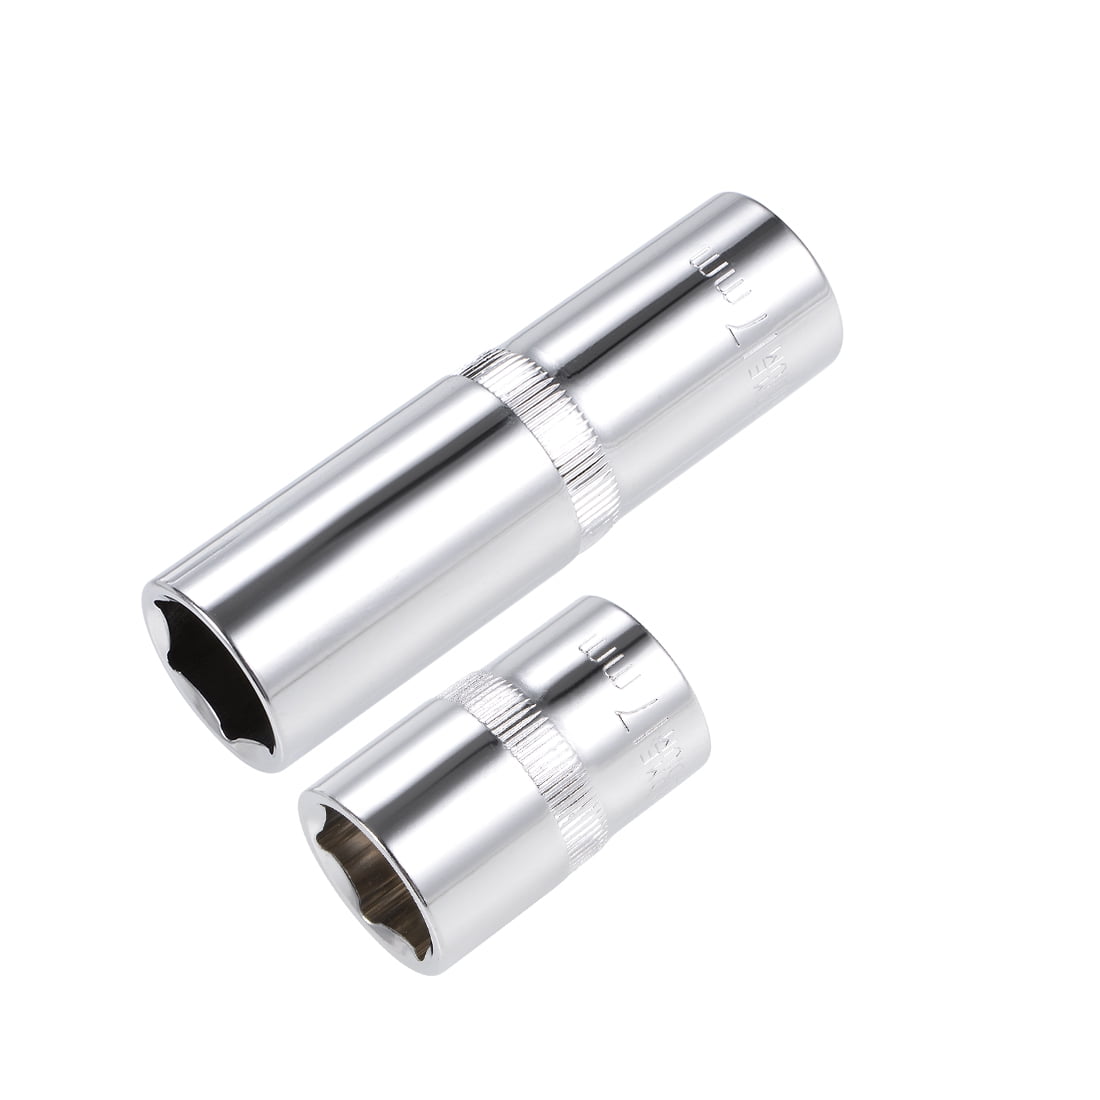 uxcell 2 Pcs 1/2-Inch Drive by 18mm Shallow Impact Socket Cr-Mo Alloy Steel Metric 6-Point